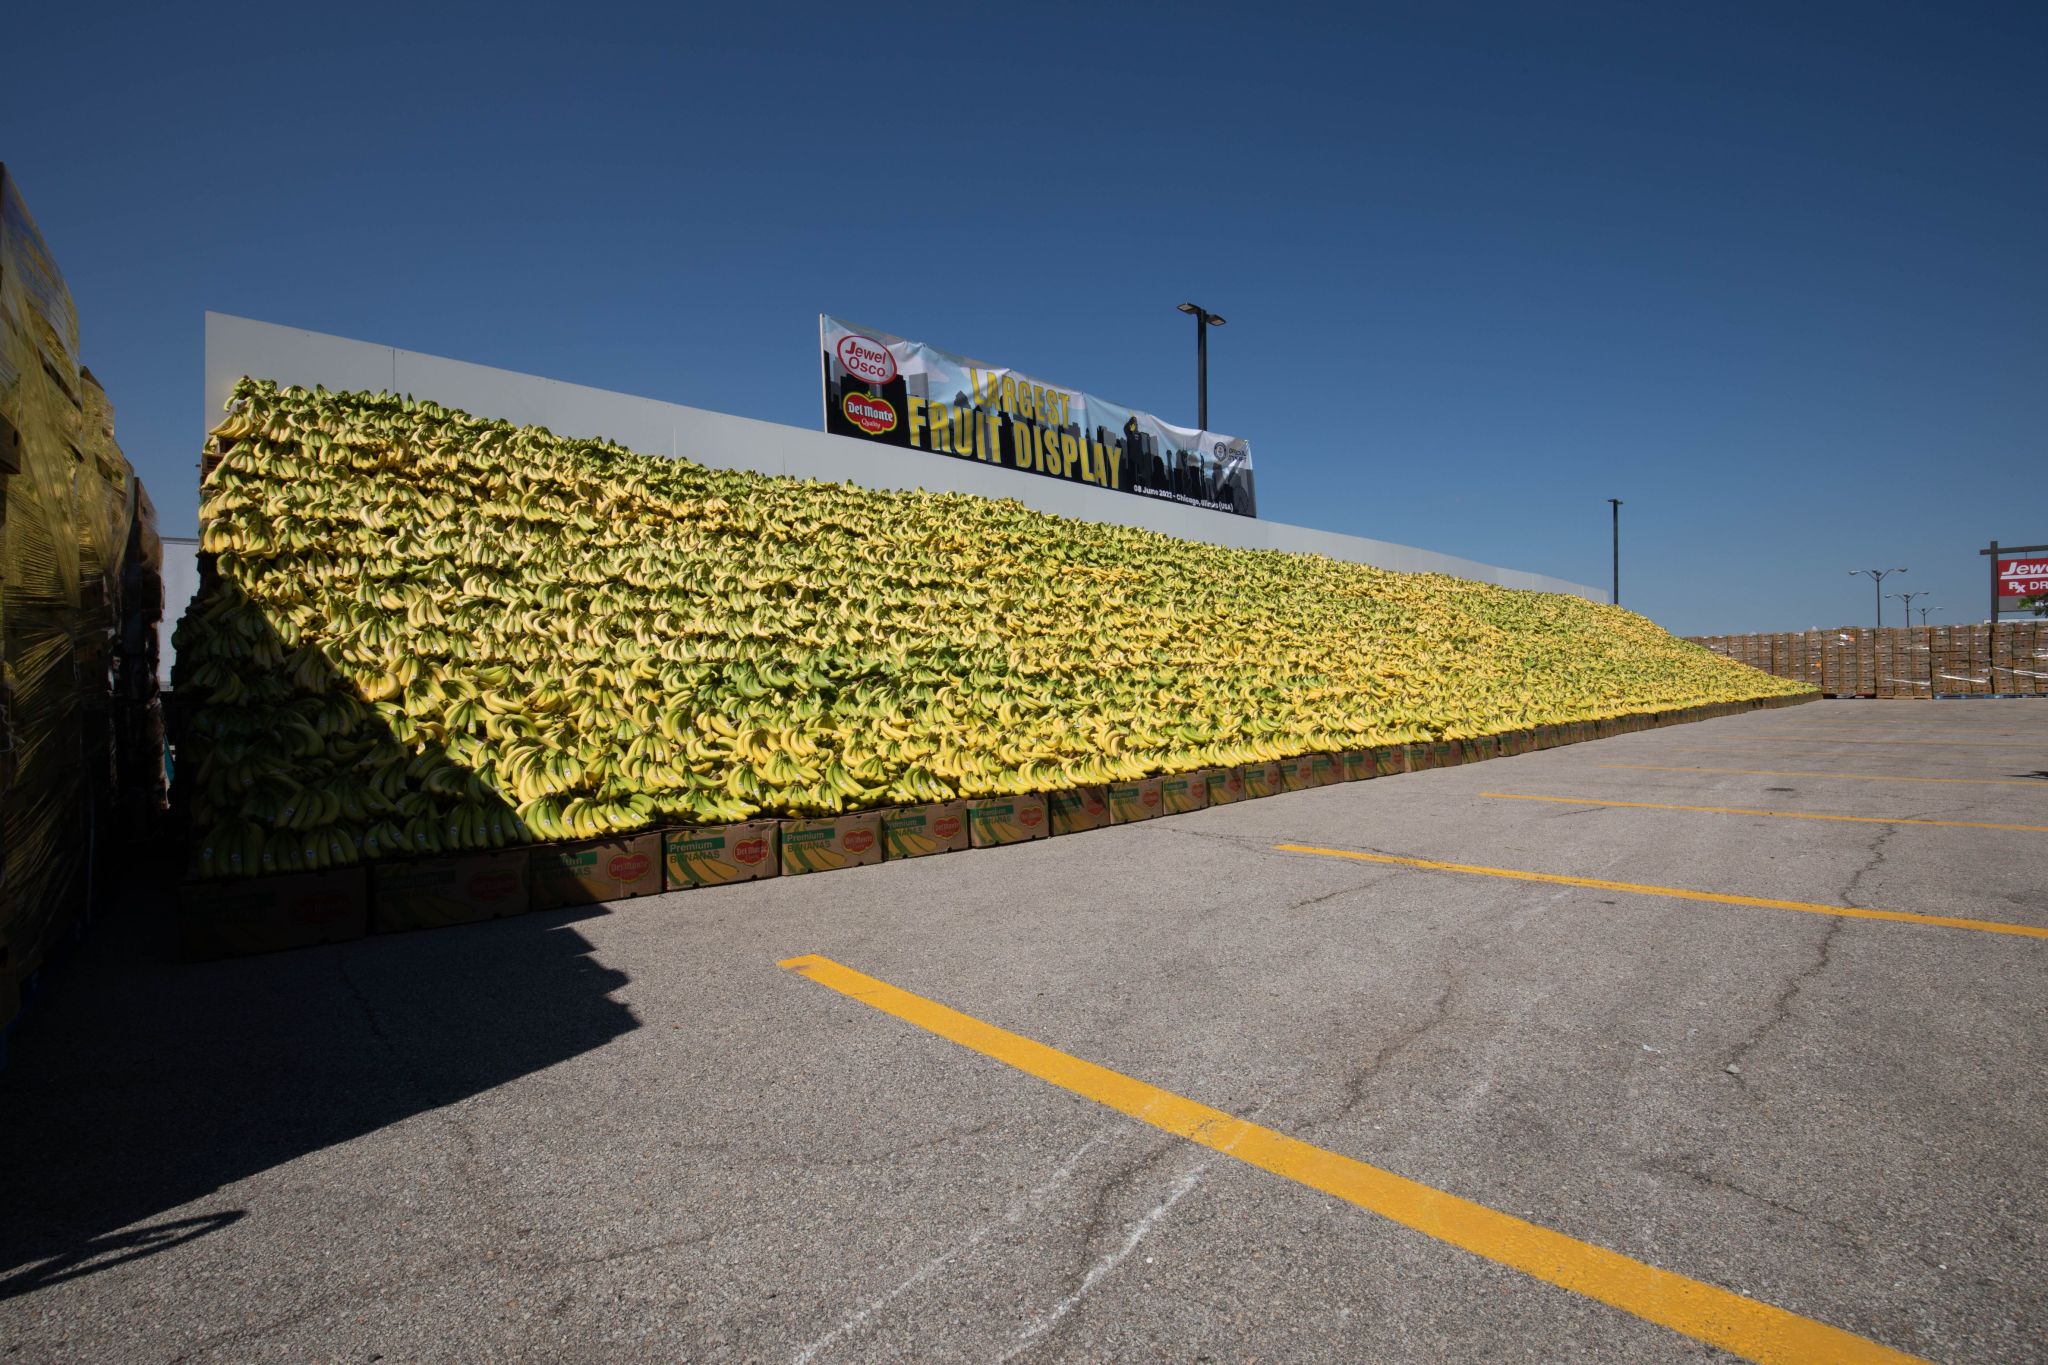 The world’s largest fruit display completed on June 8 by Jewel-Osco in Westmont (US) in collaboration with Del Monte Fresh Produce. Credit: Del Monte.